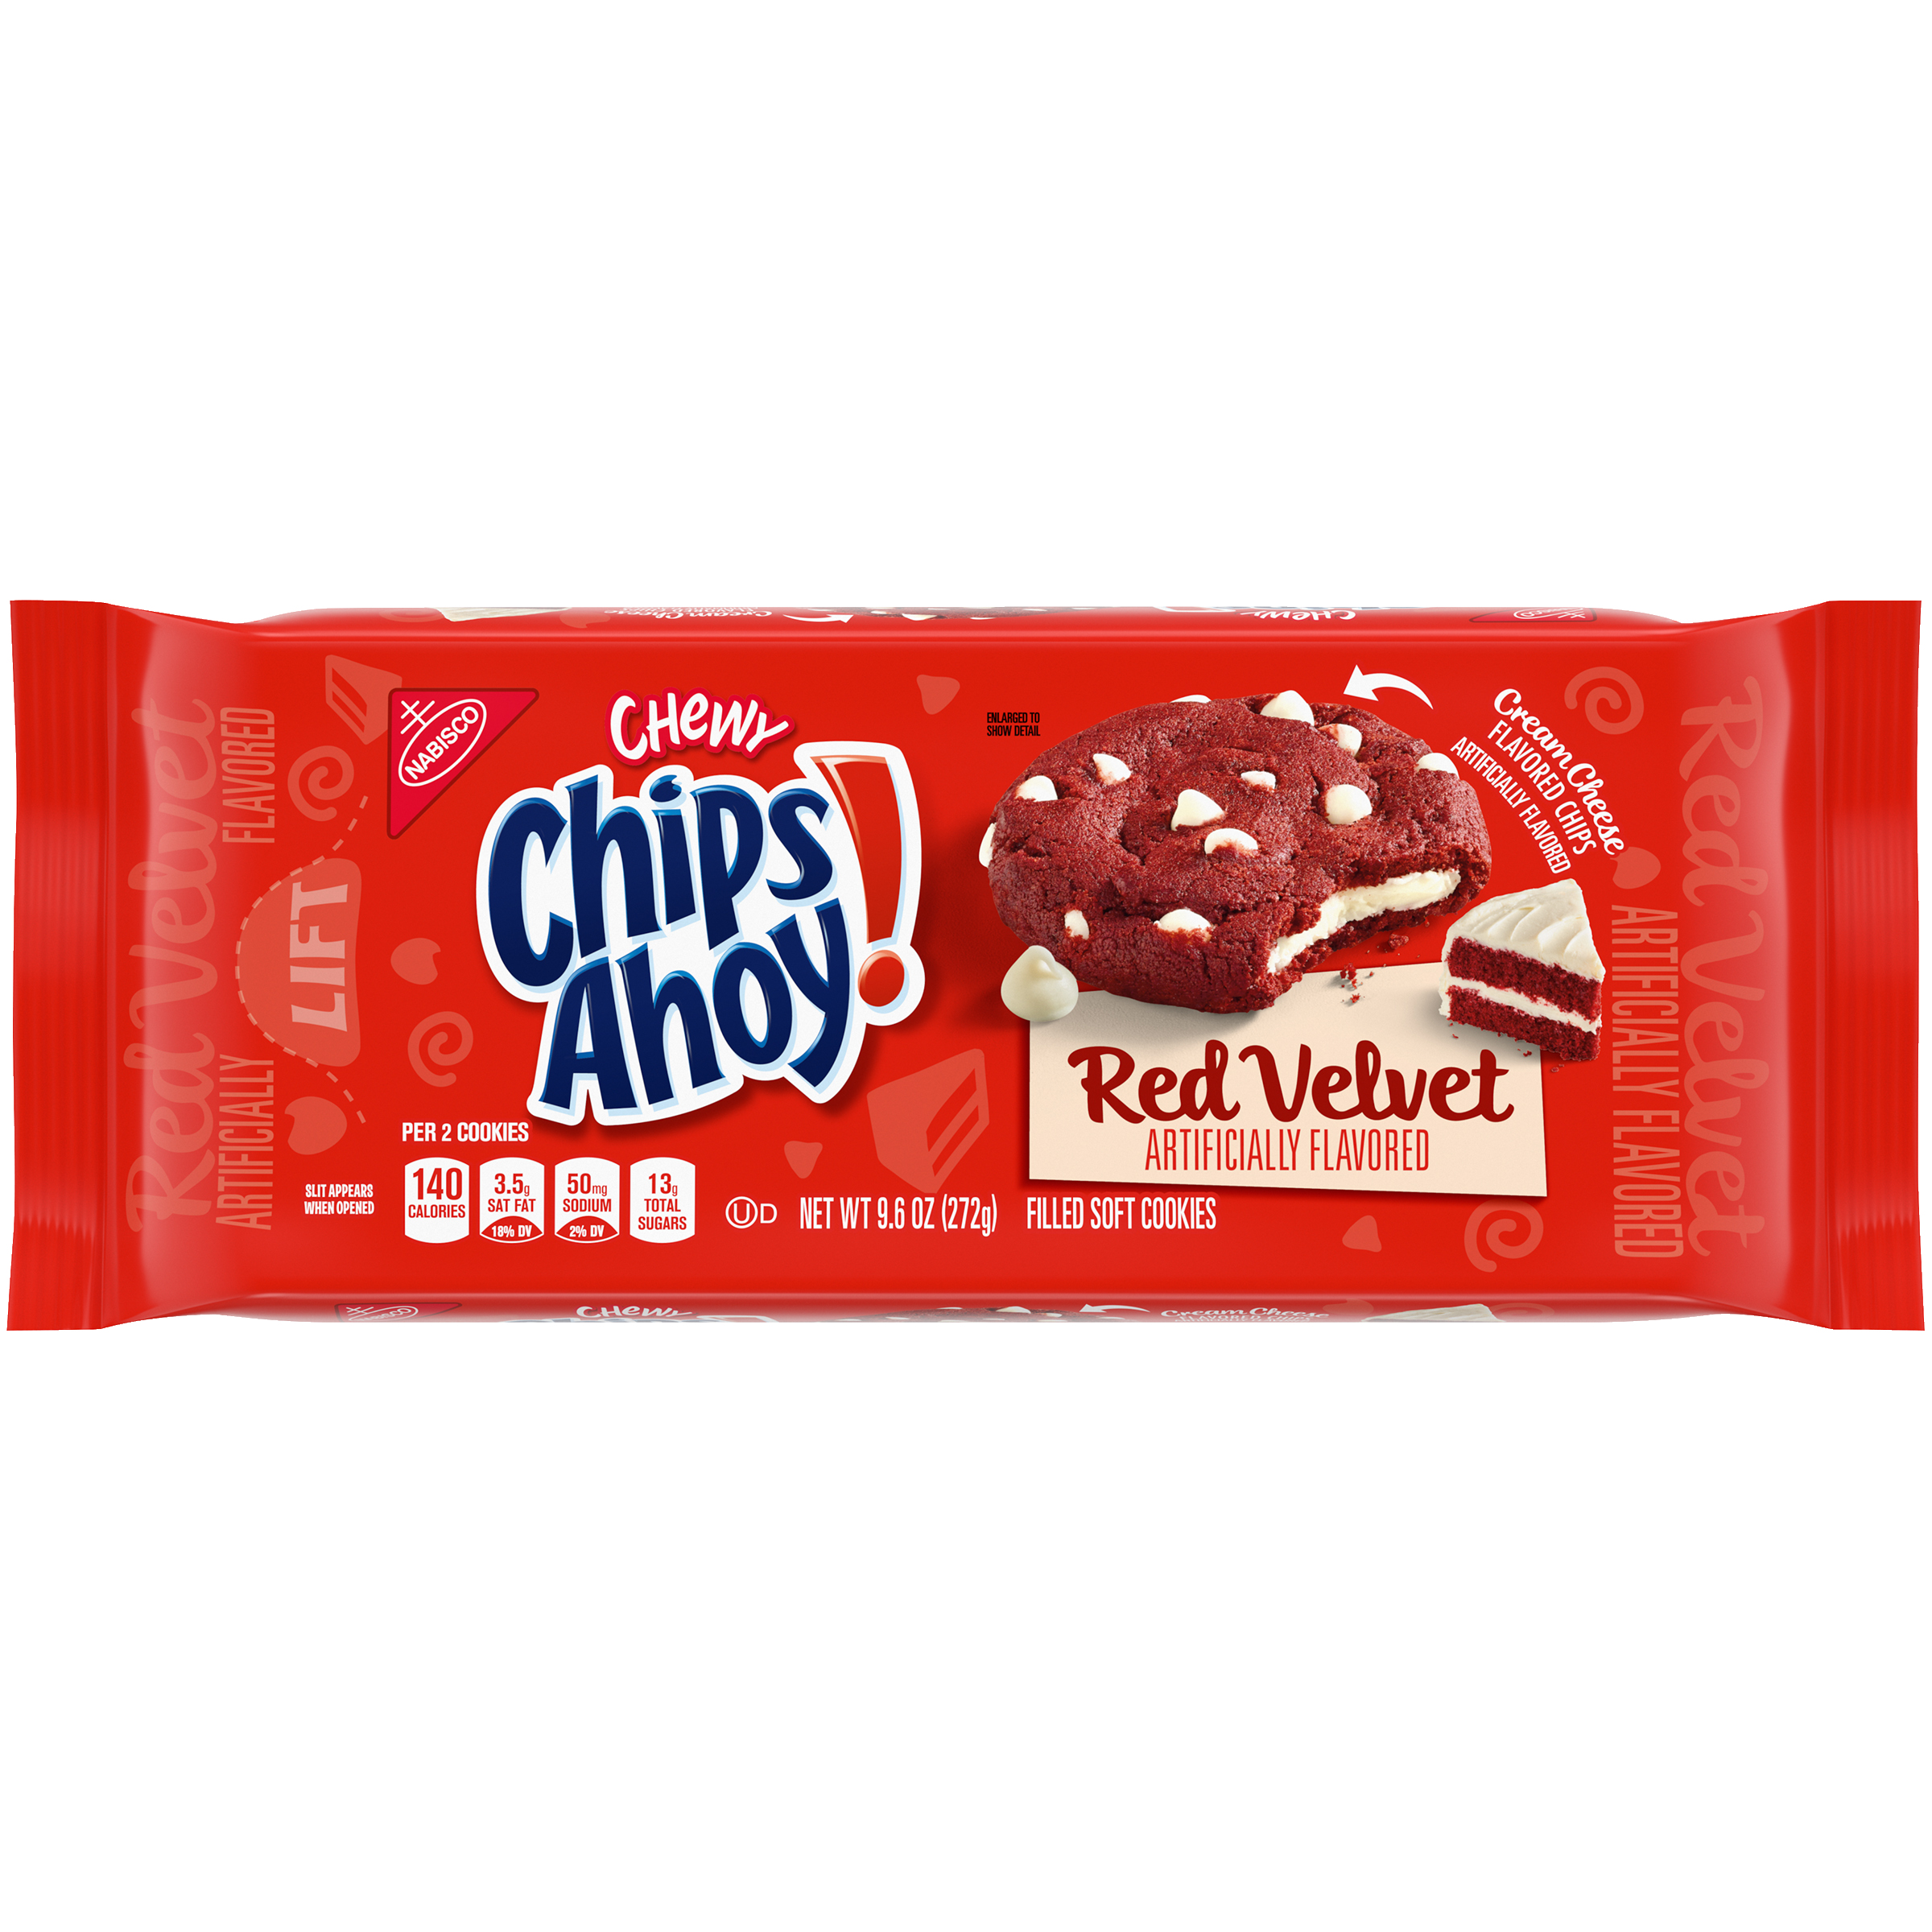 CHIPS AHOY! Chewy Red Velvet Cookies, 9.6 oz-1